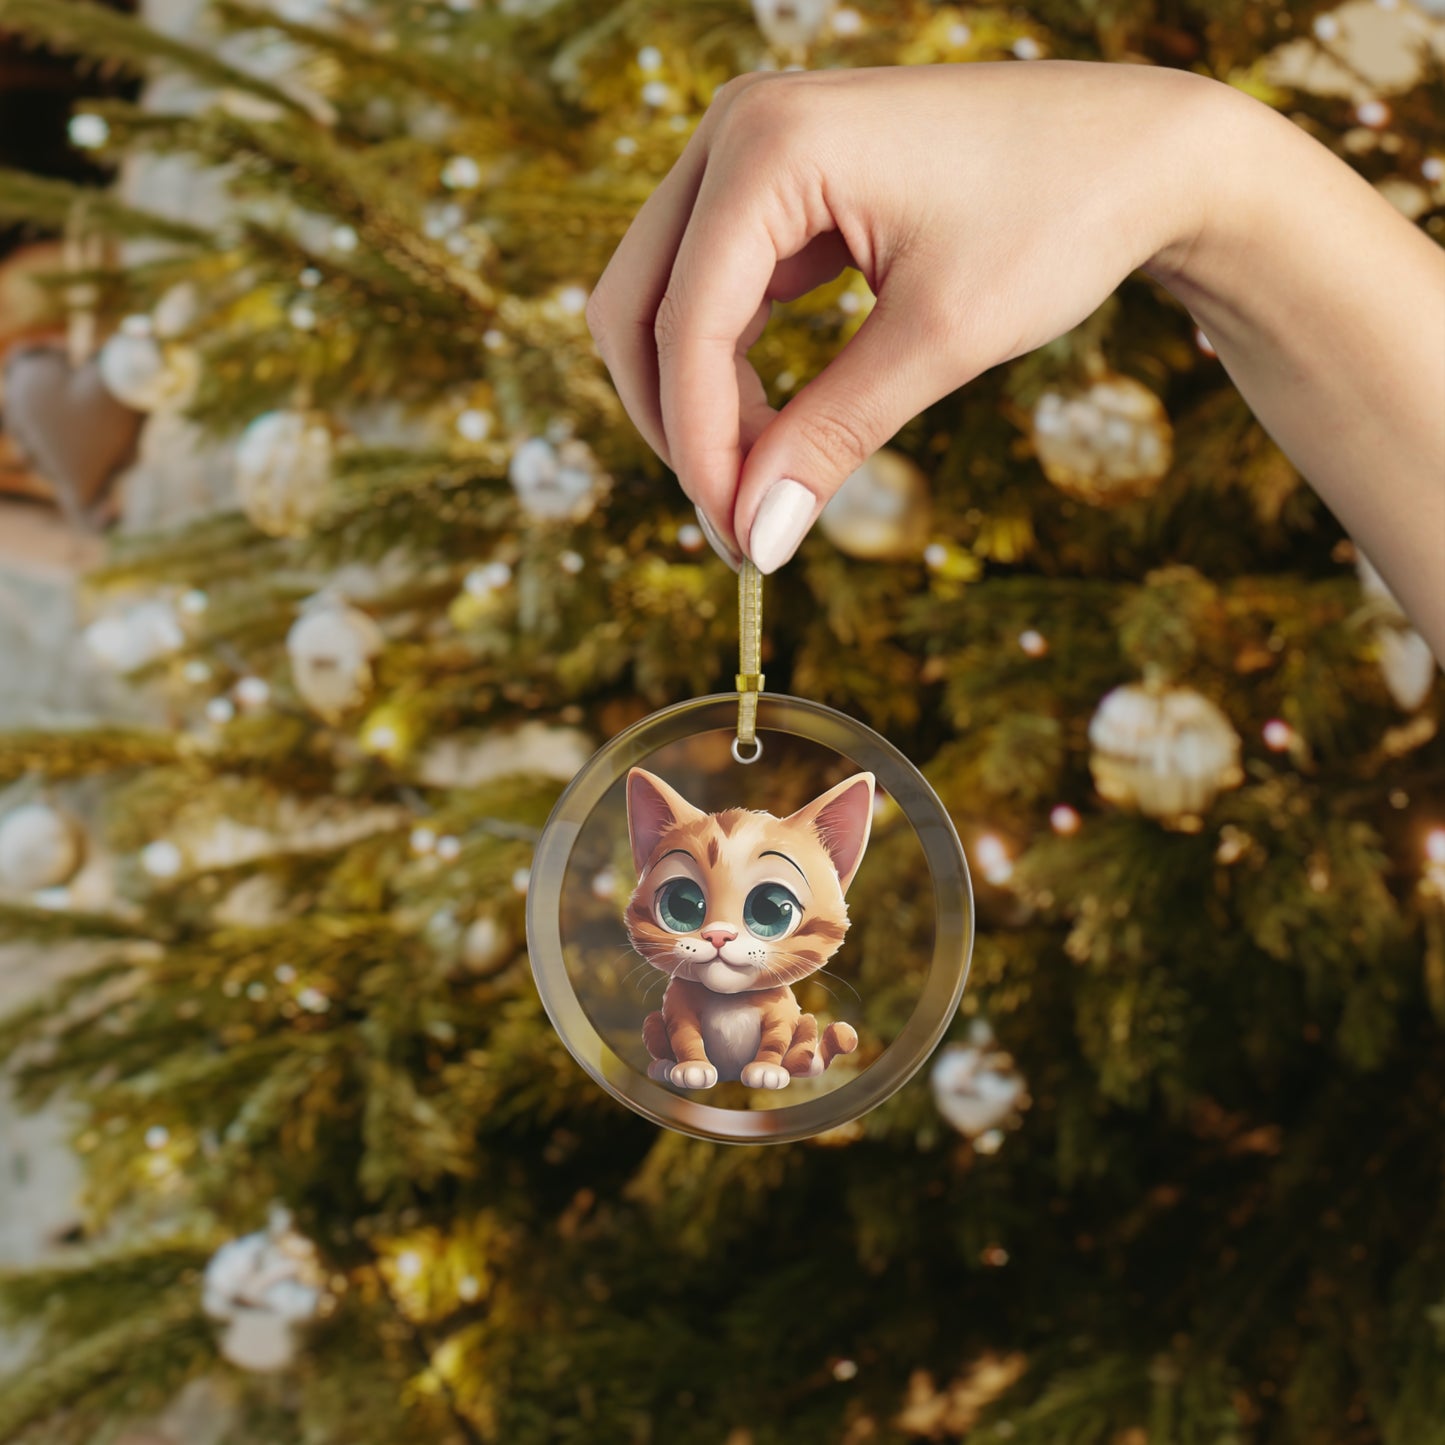 Kitten with Big Eyes Glass Ornament